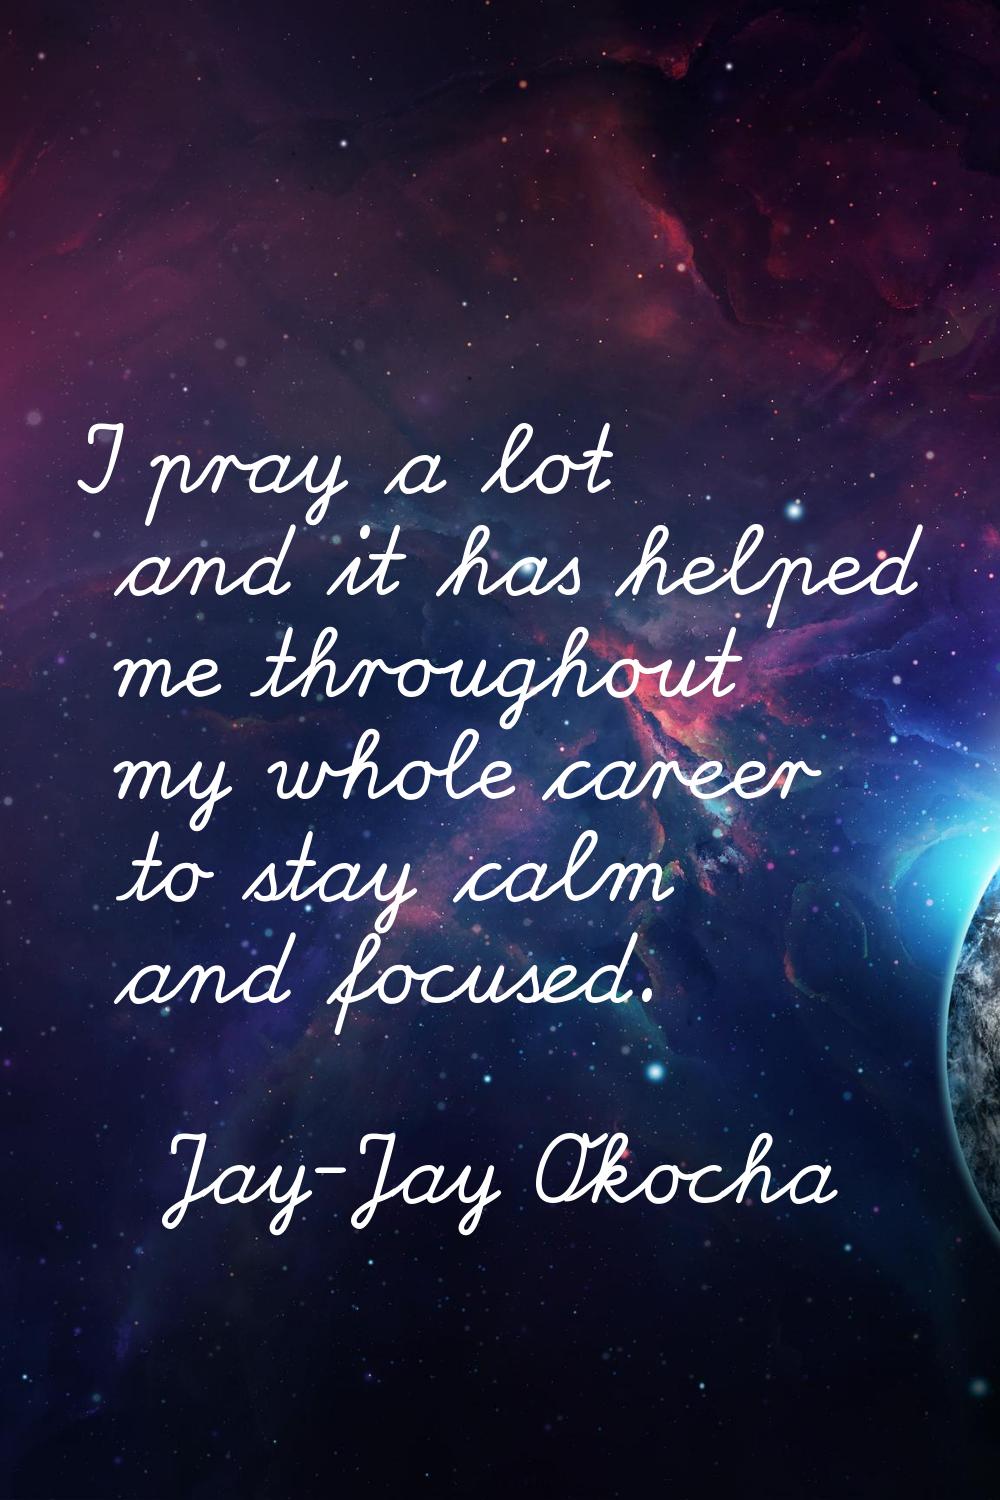 I pray a lot and it has helped me throughout my whole career to stay calm and focused.